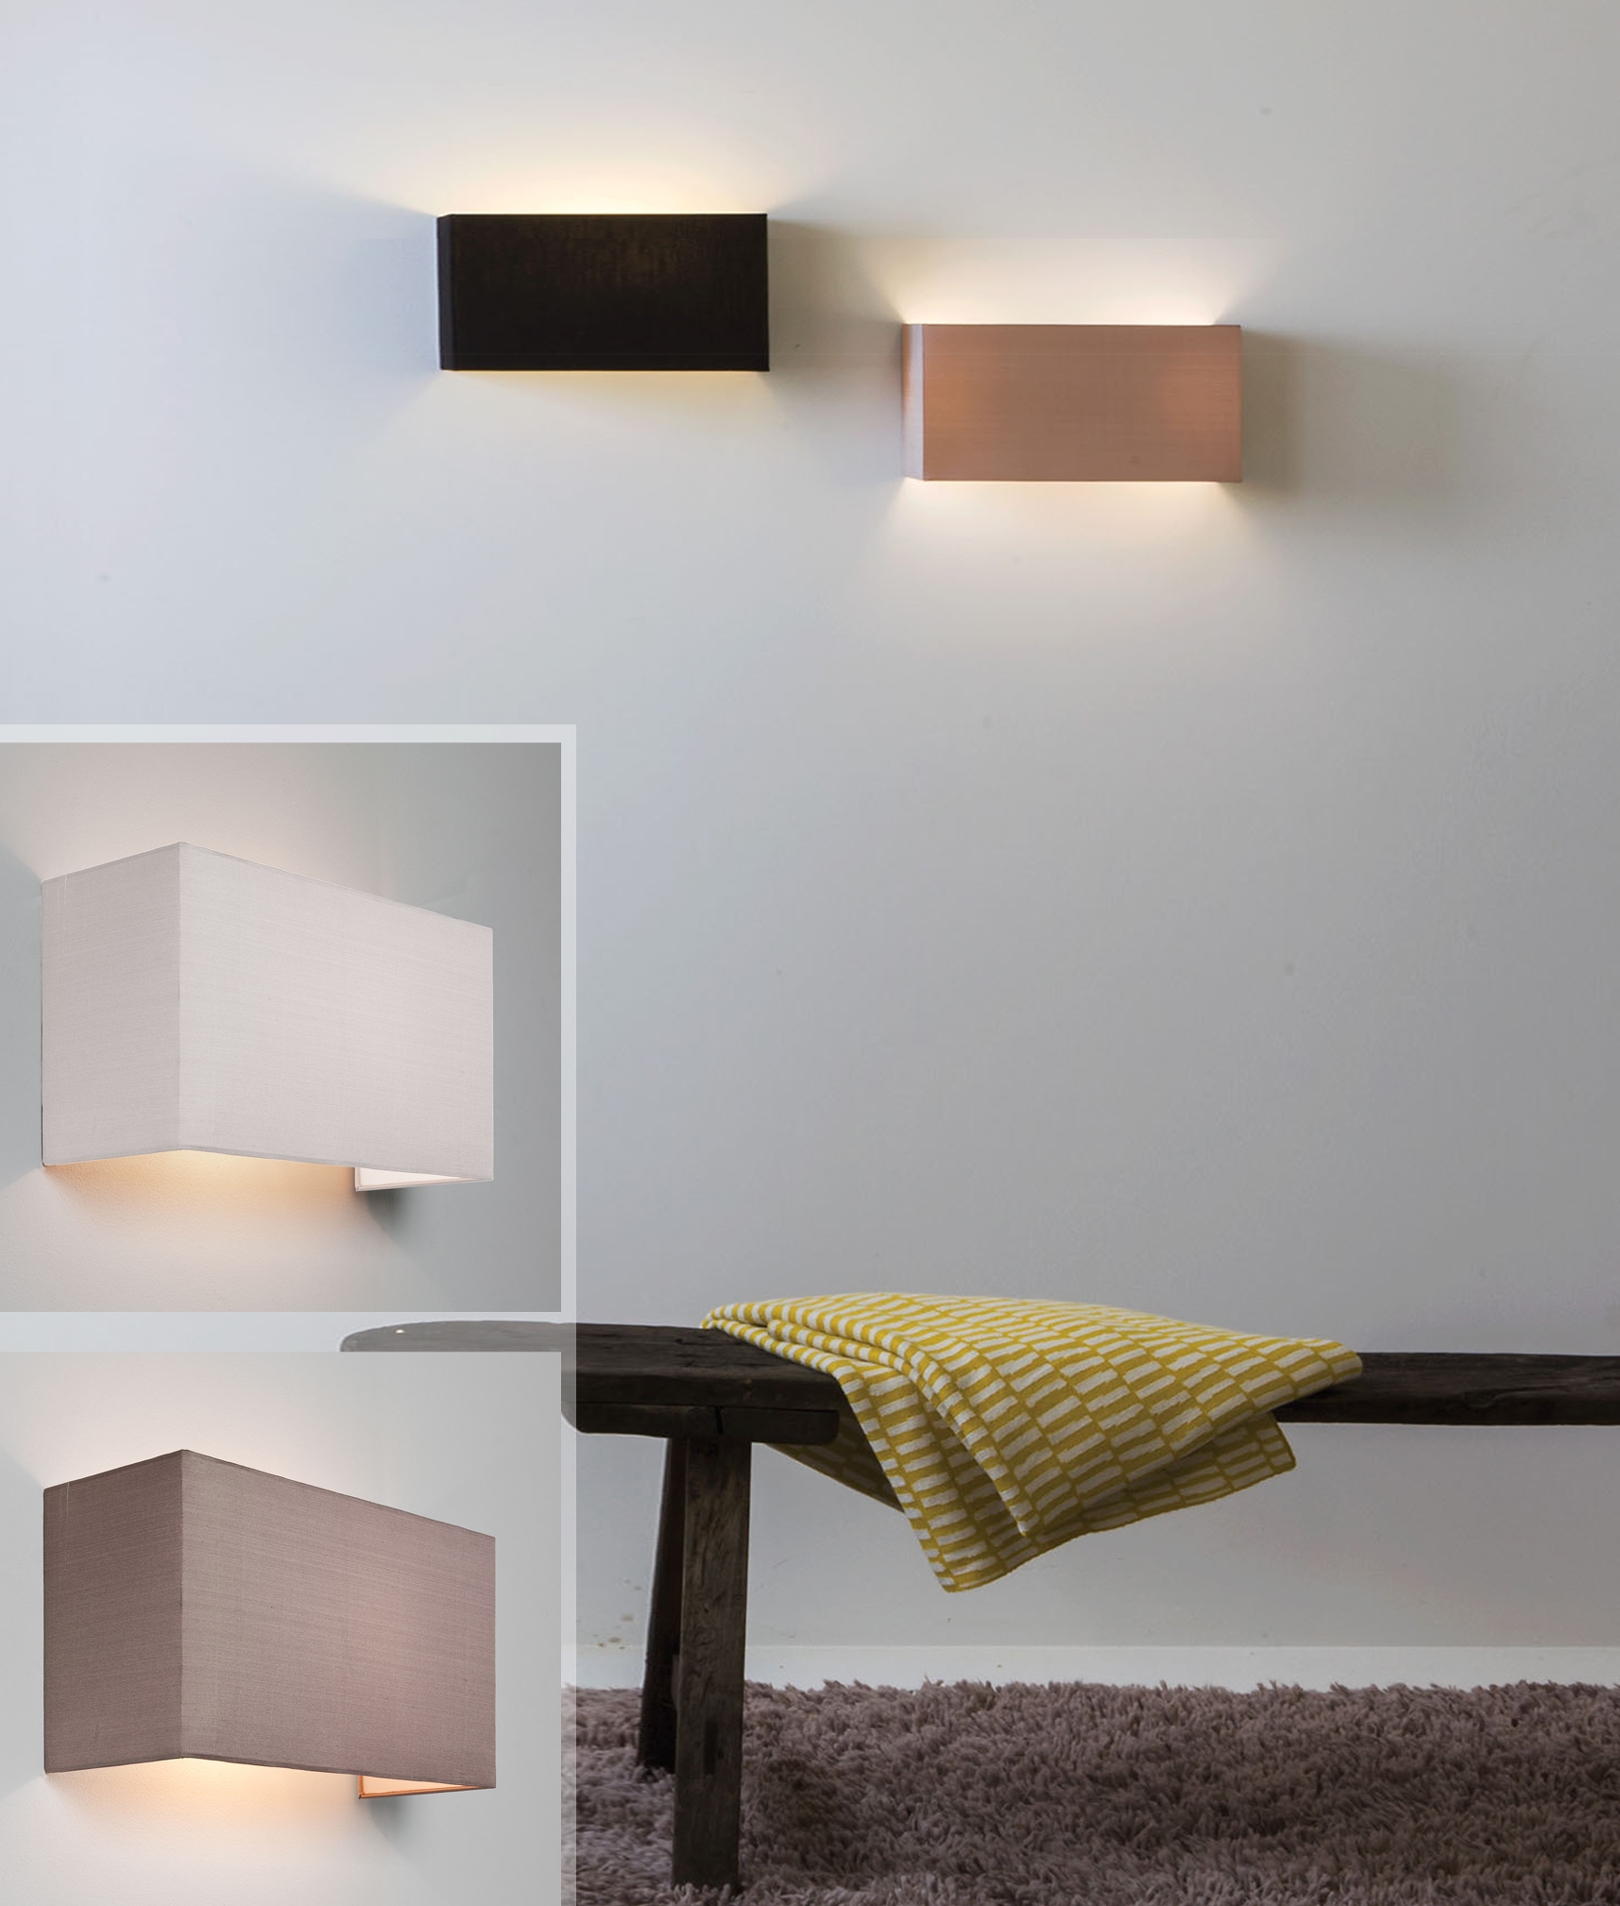 Details about   Wall Sconce Motiv Double Light with Fabric Shades